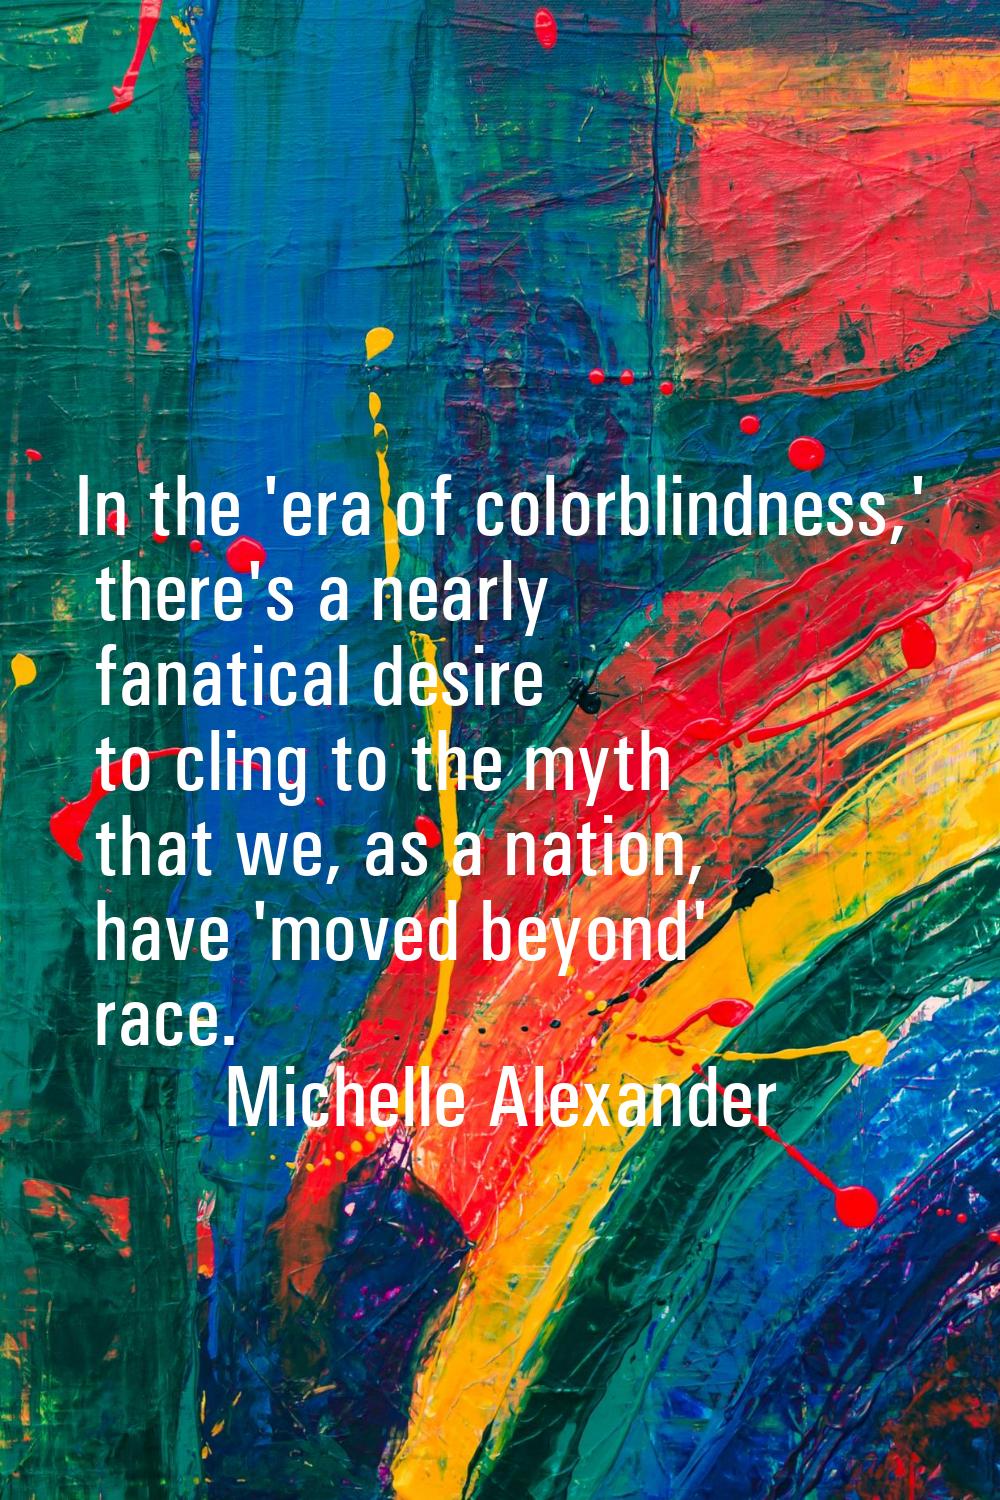 In the 'era of colorblindness,' there's a nearly fanatical desire to cling to the myth that we, as 